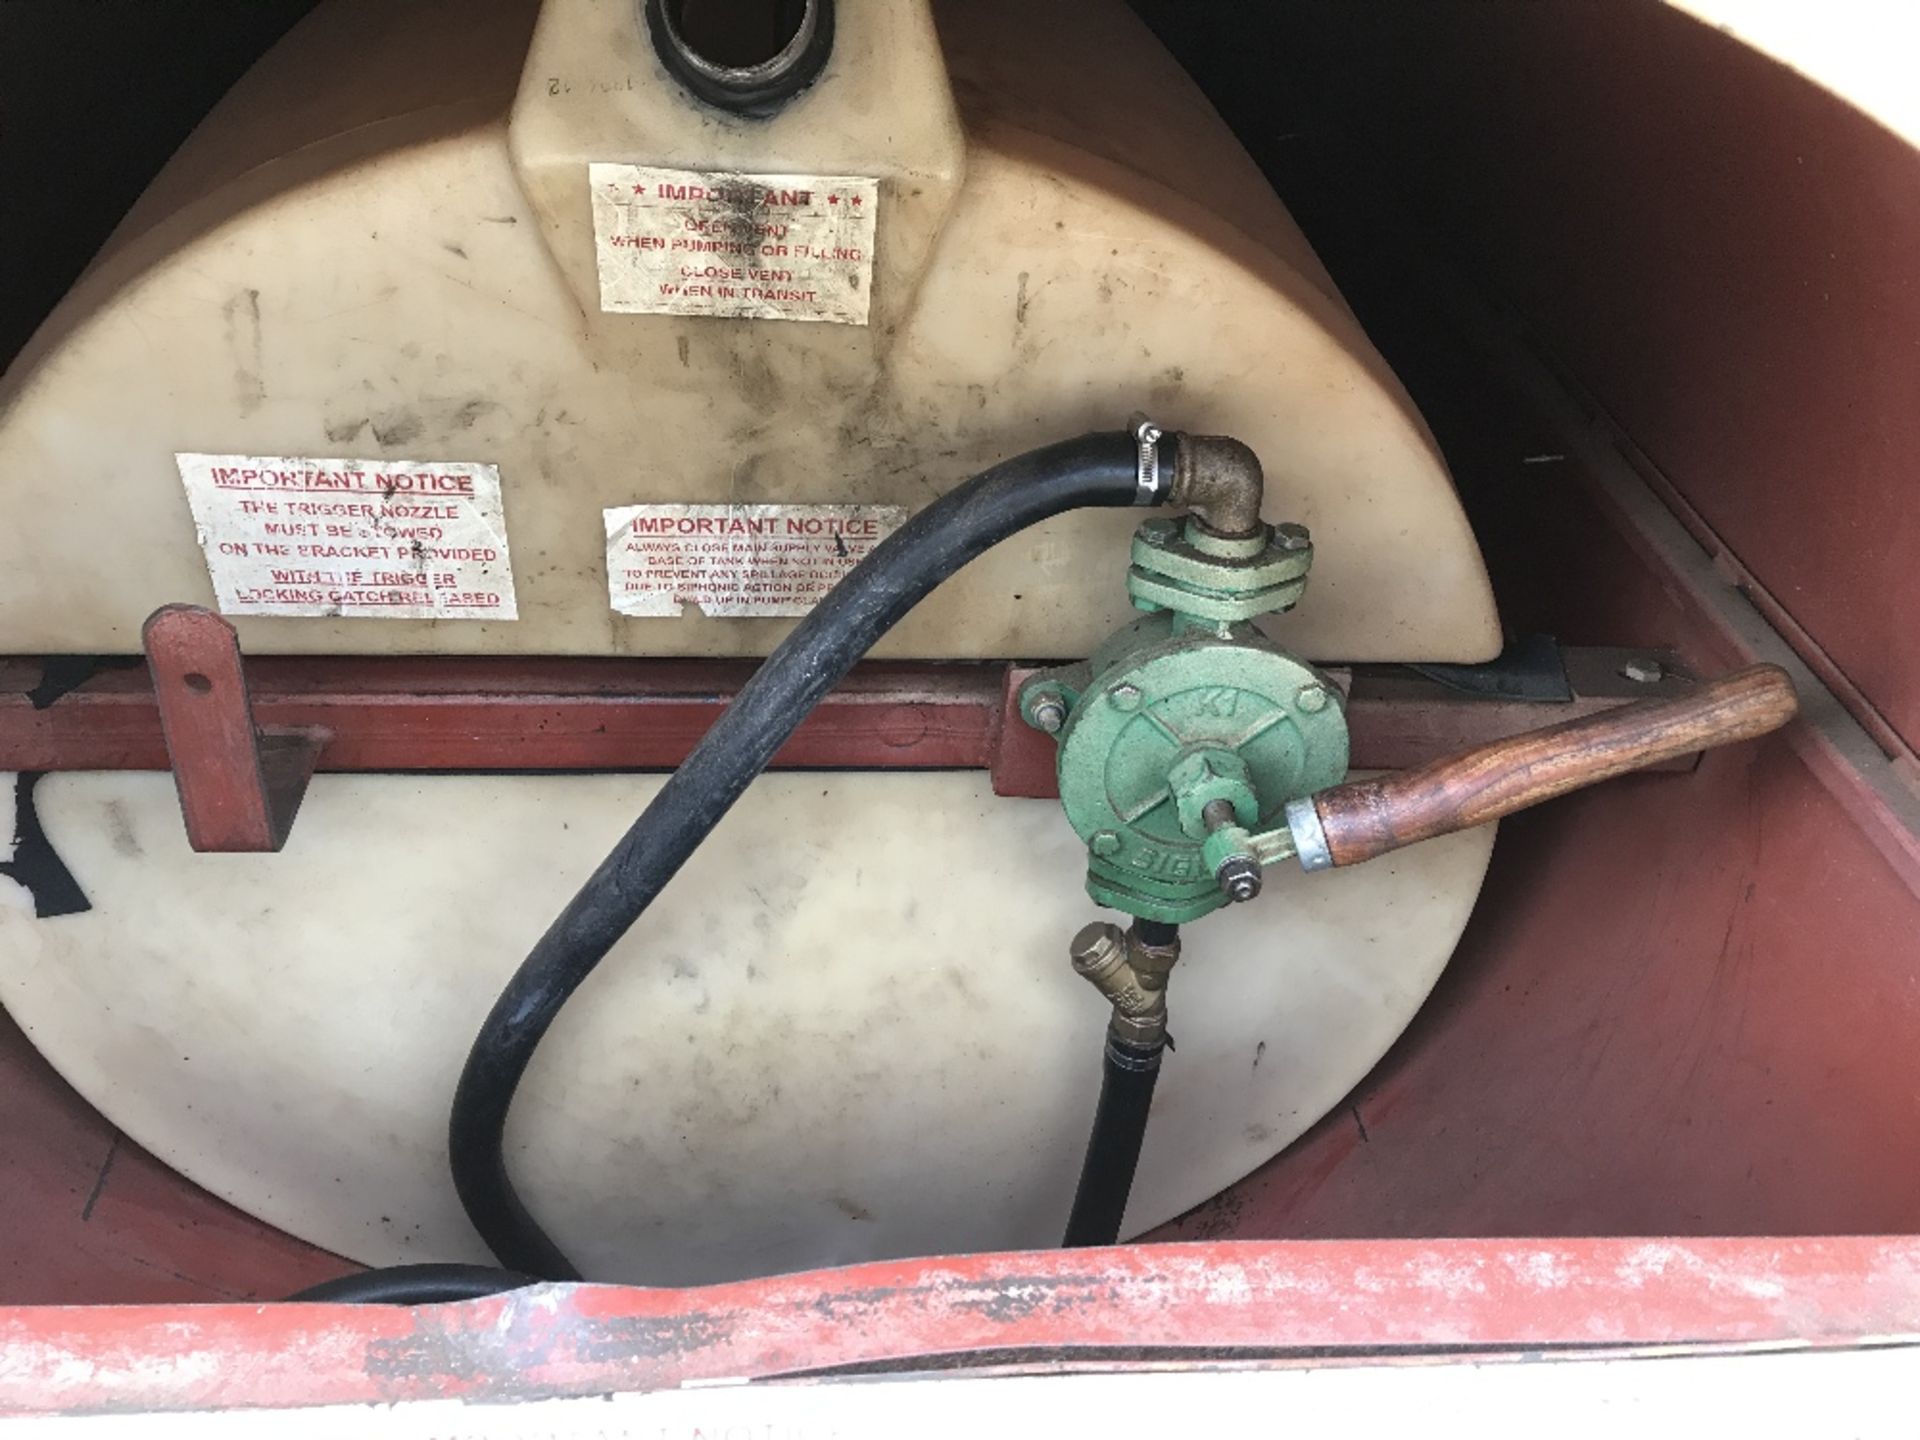 TRAILER ENGINEERING BUNDED FUEL TANK COMPLETE WITH PUMP AND HOSE - Image 3 of 3